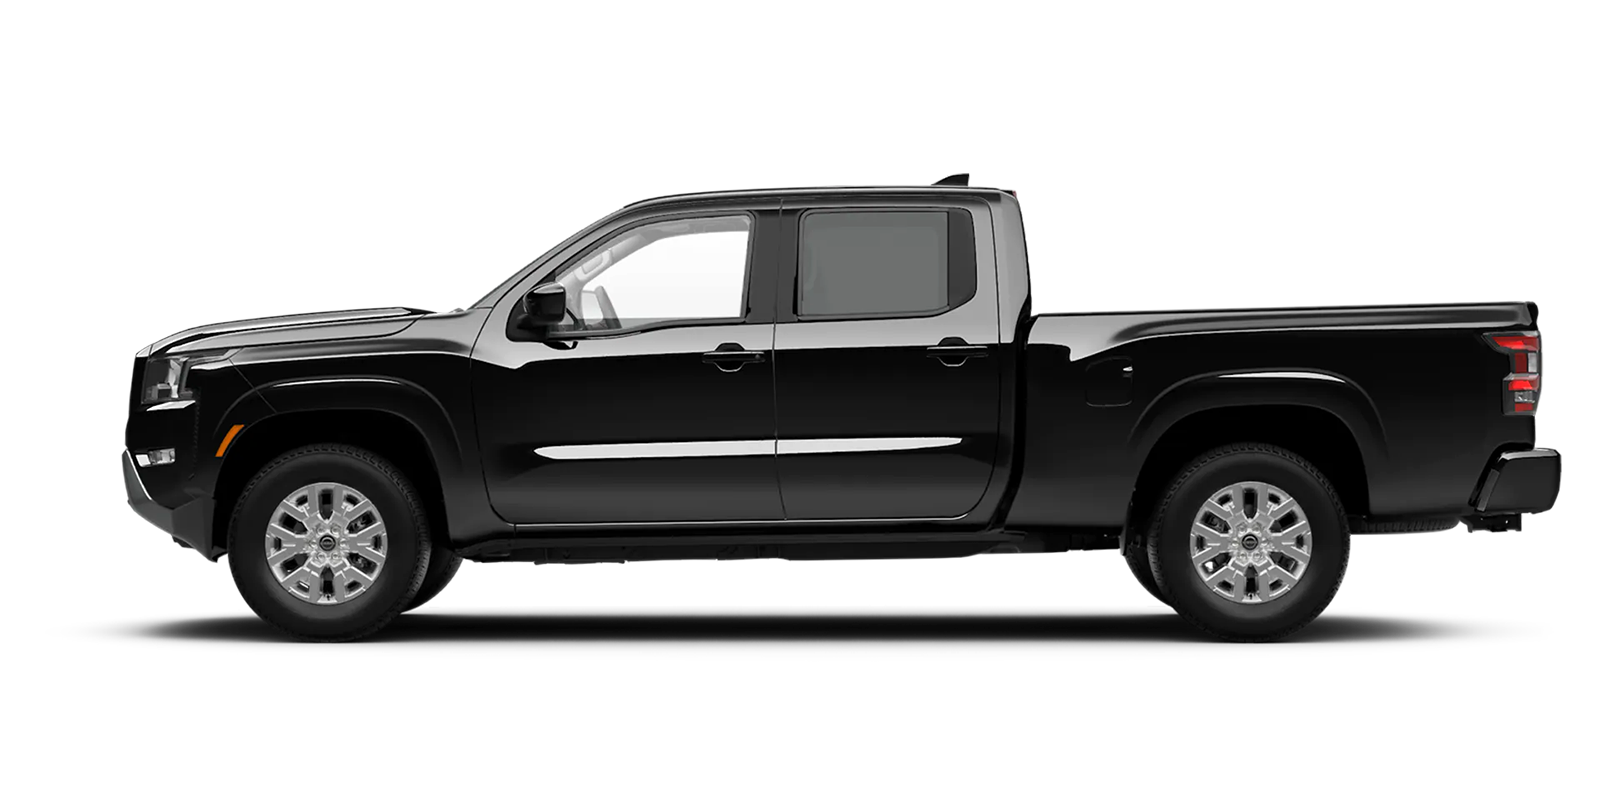 2022 Frontier Crew Cab Long Bed SV 4x2 in Super Black | Cherokee County Nissan in Holly Springs GA